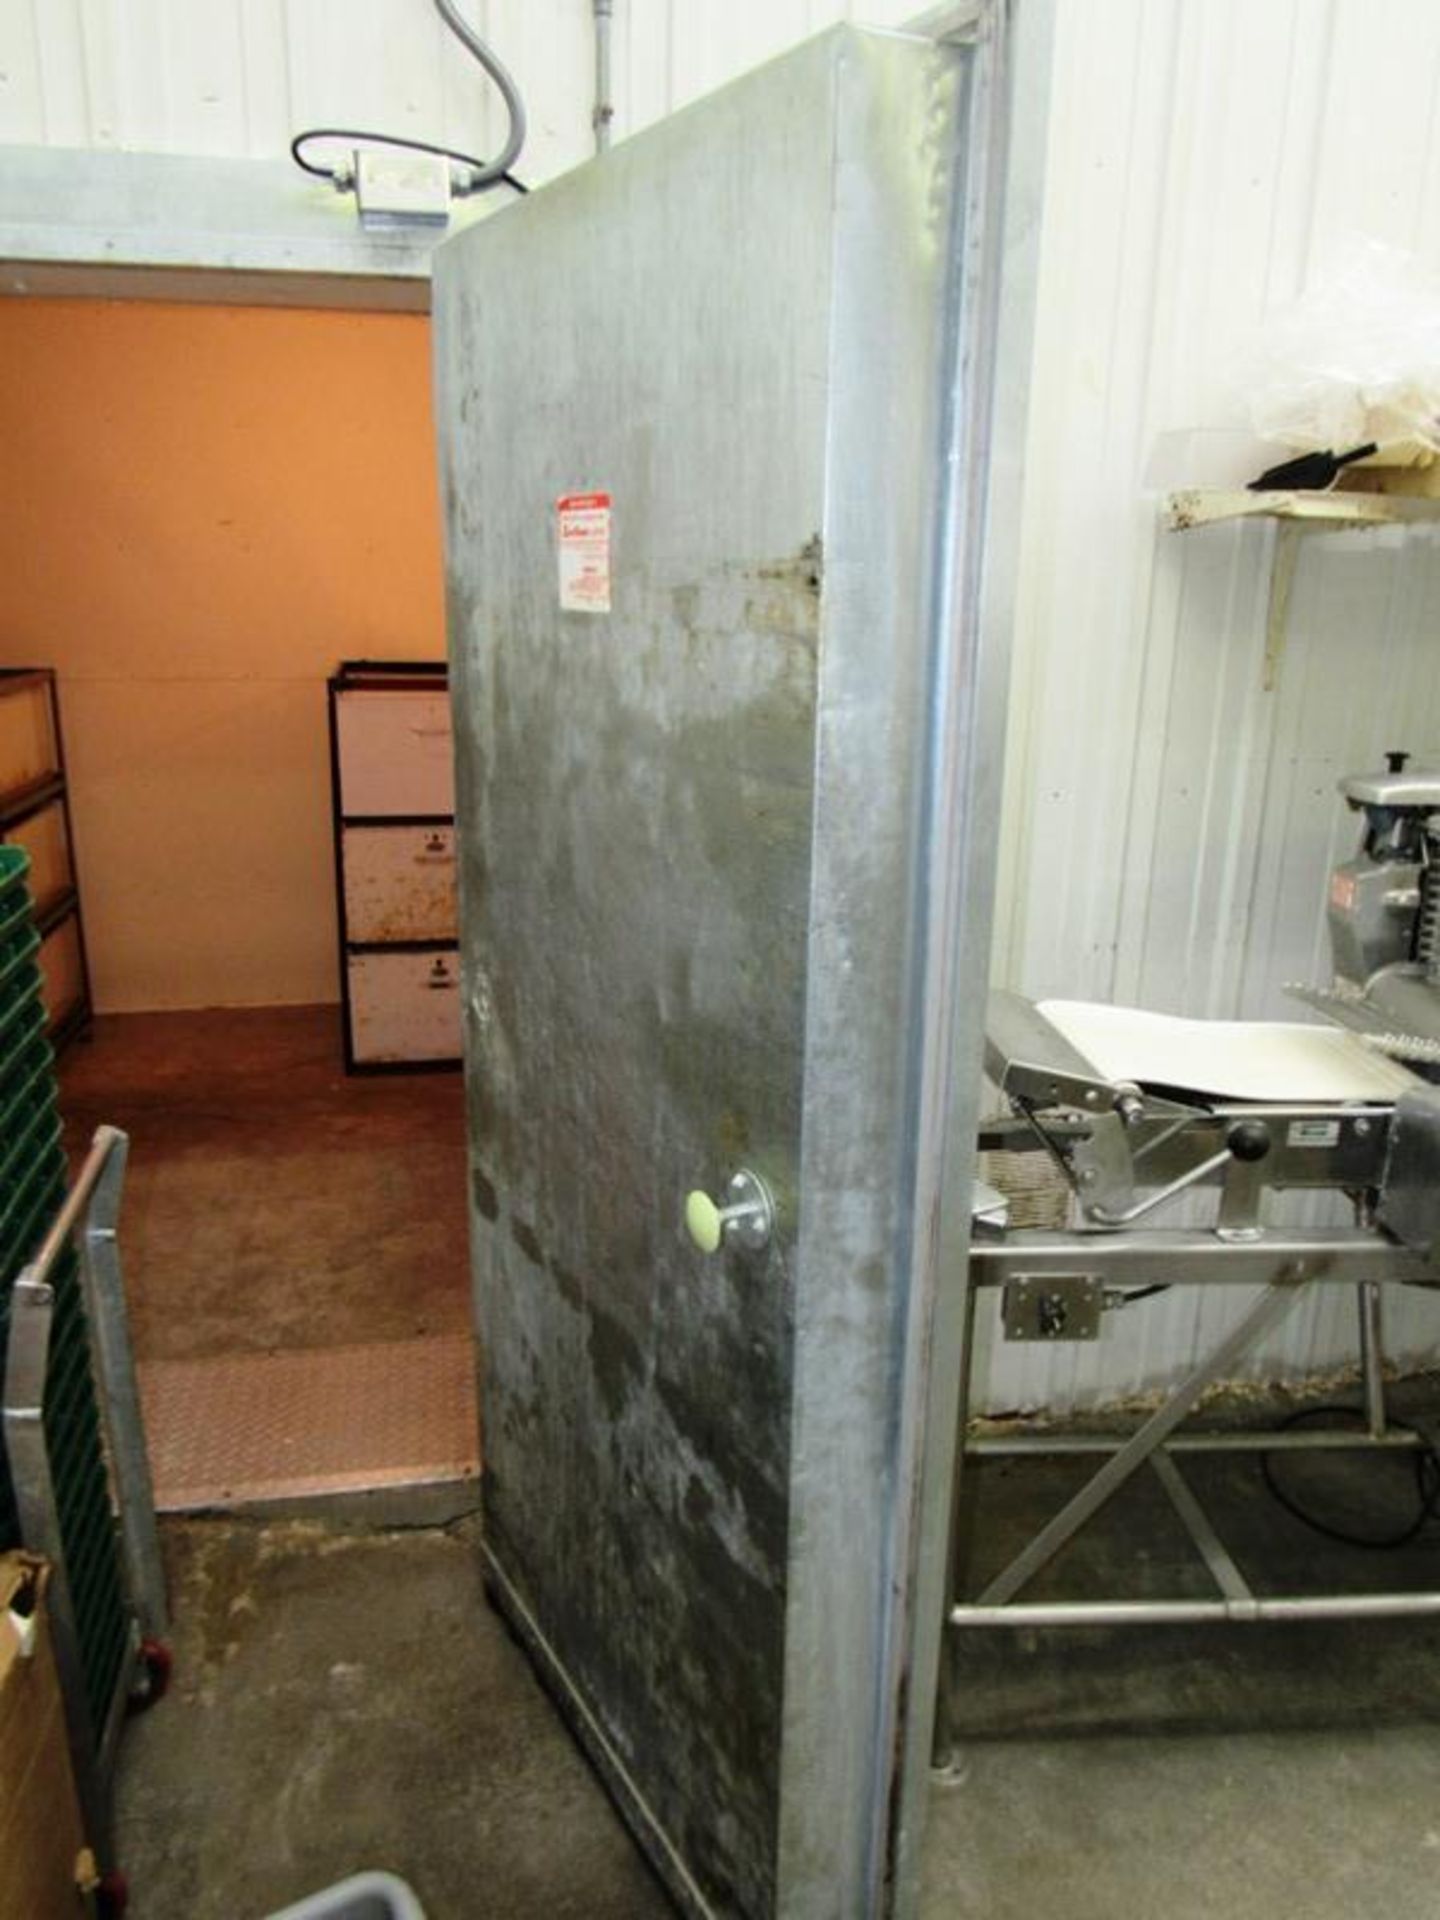 Southeast Cooler Brand Mdl. F06 535 Freezer Door, 6" thick X 38" wide X 78 1/2" tall with frame - Image 2 of 2